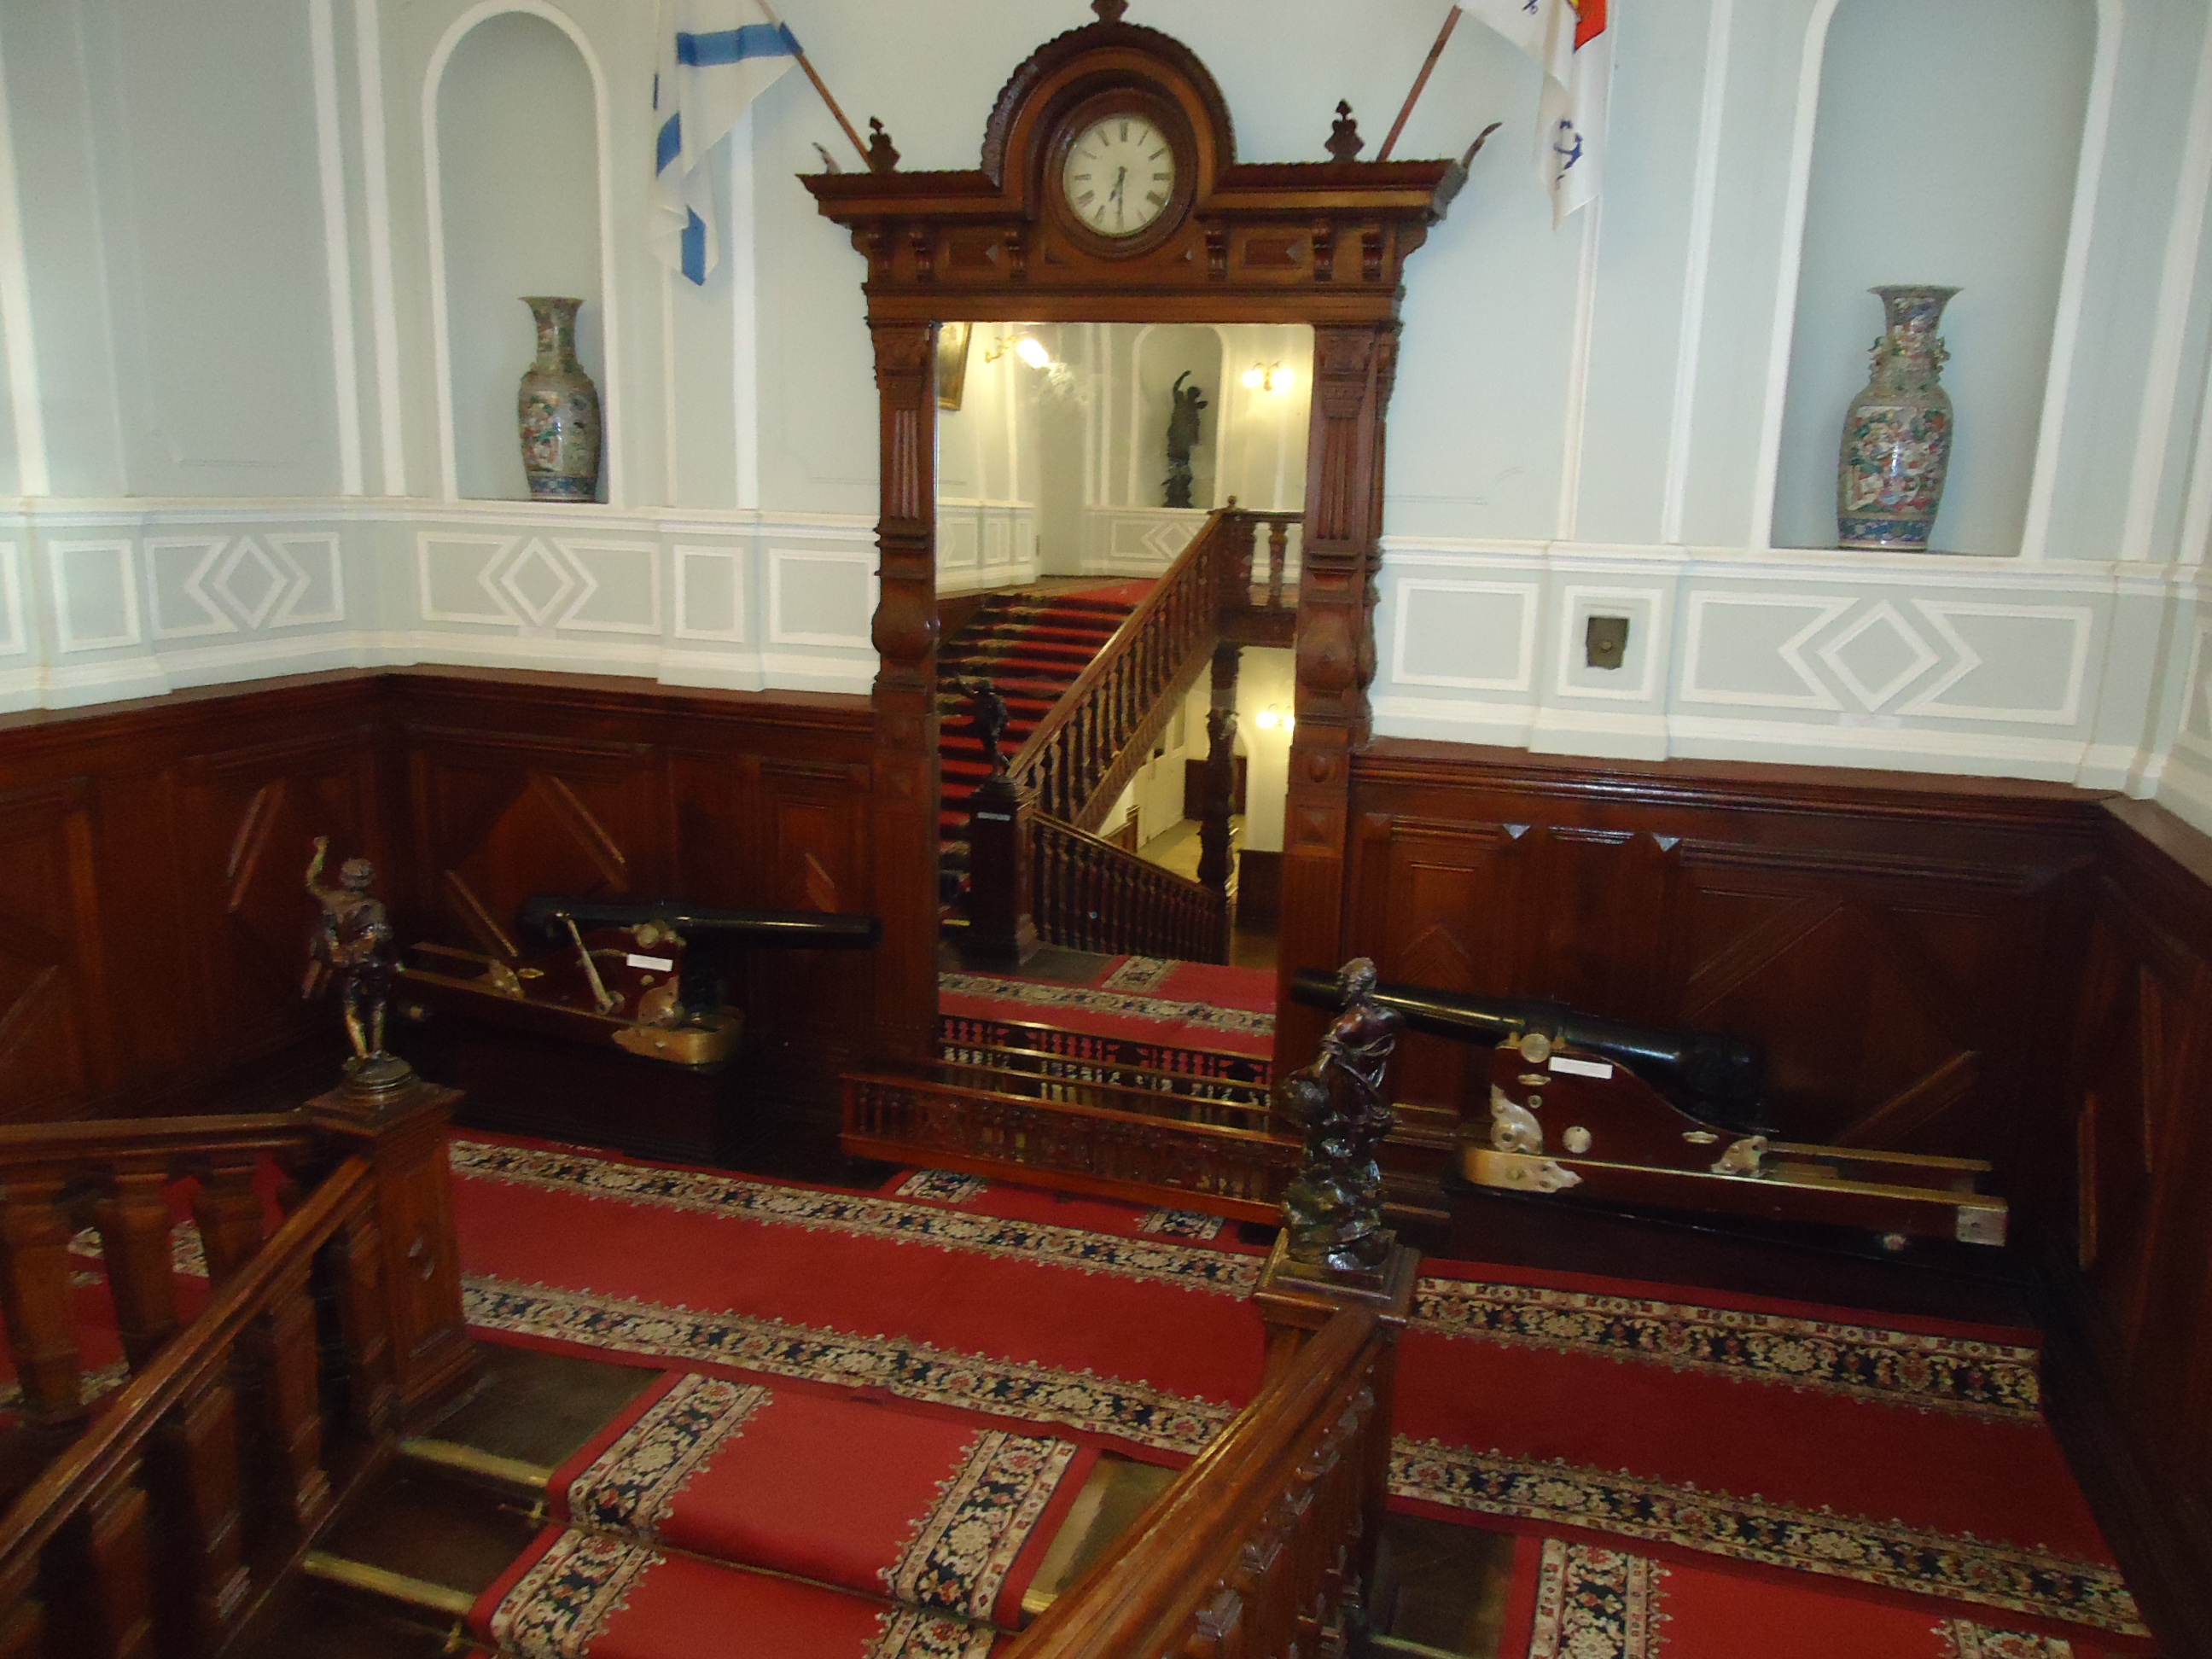 The staircase of the Officers Club